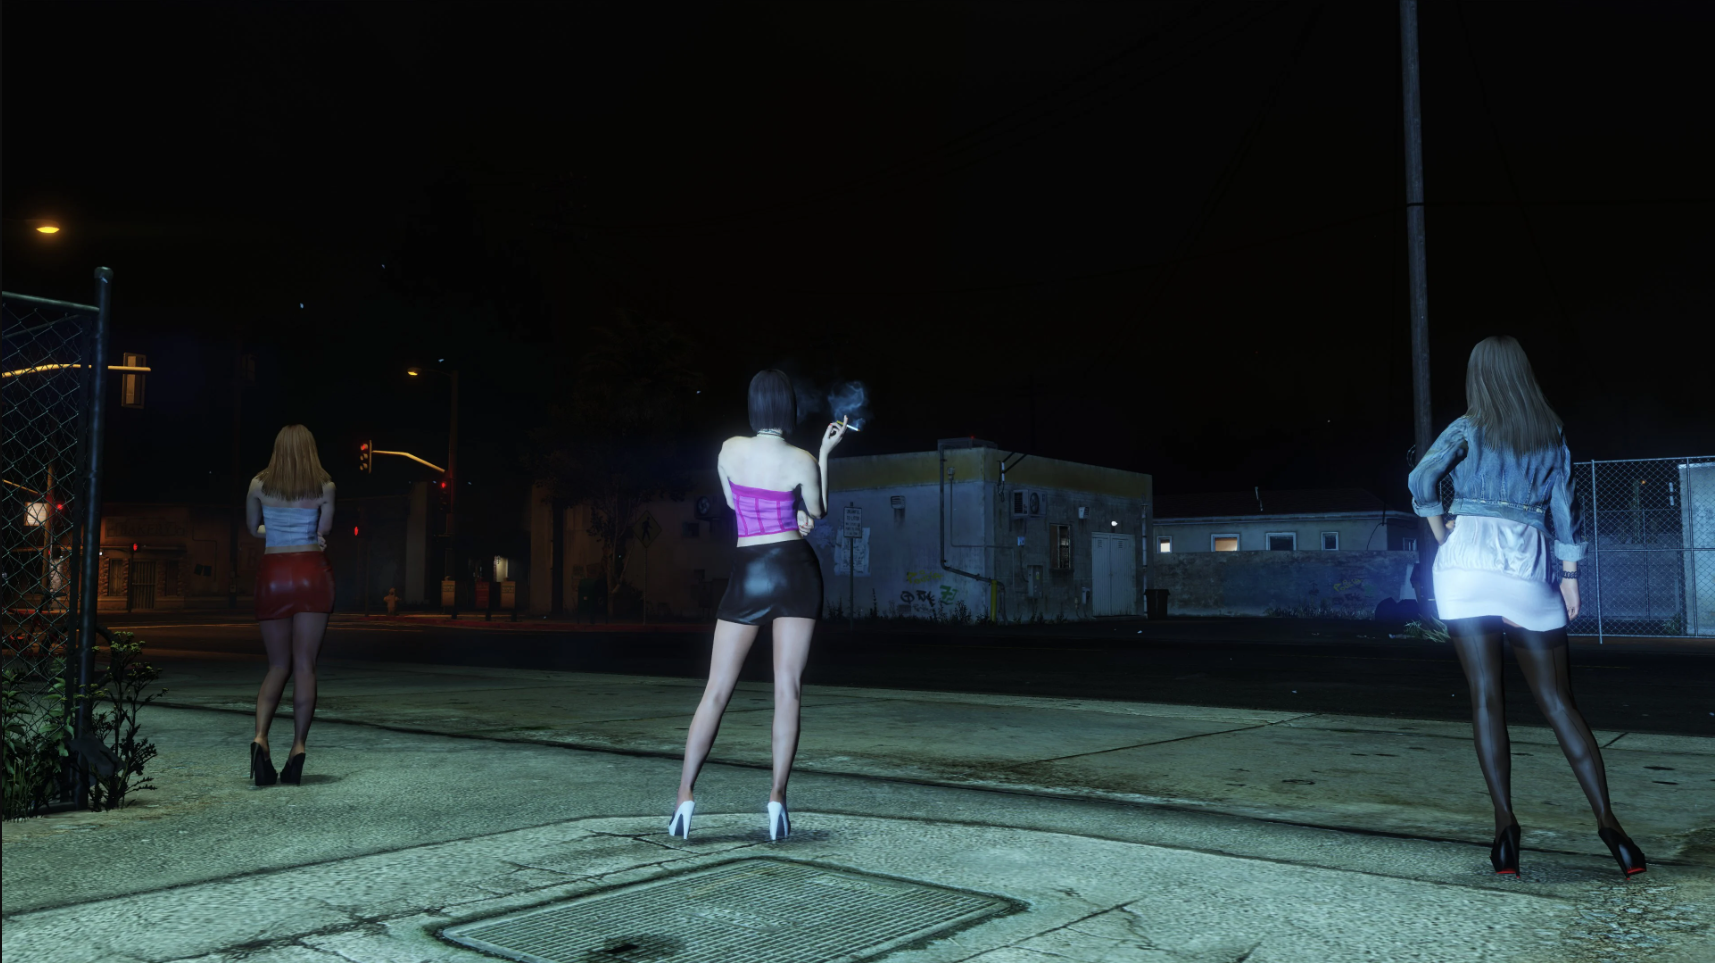 Grand Theft Auto V Completion Guide - Playthrough - Use the services of a prostitute - FA94E73